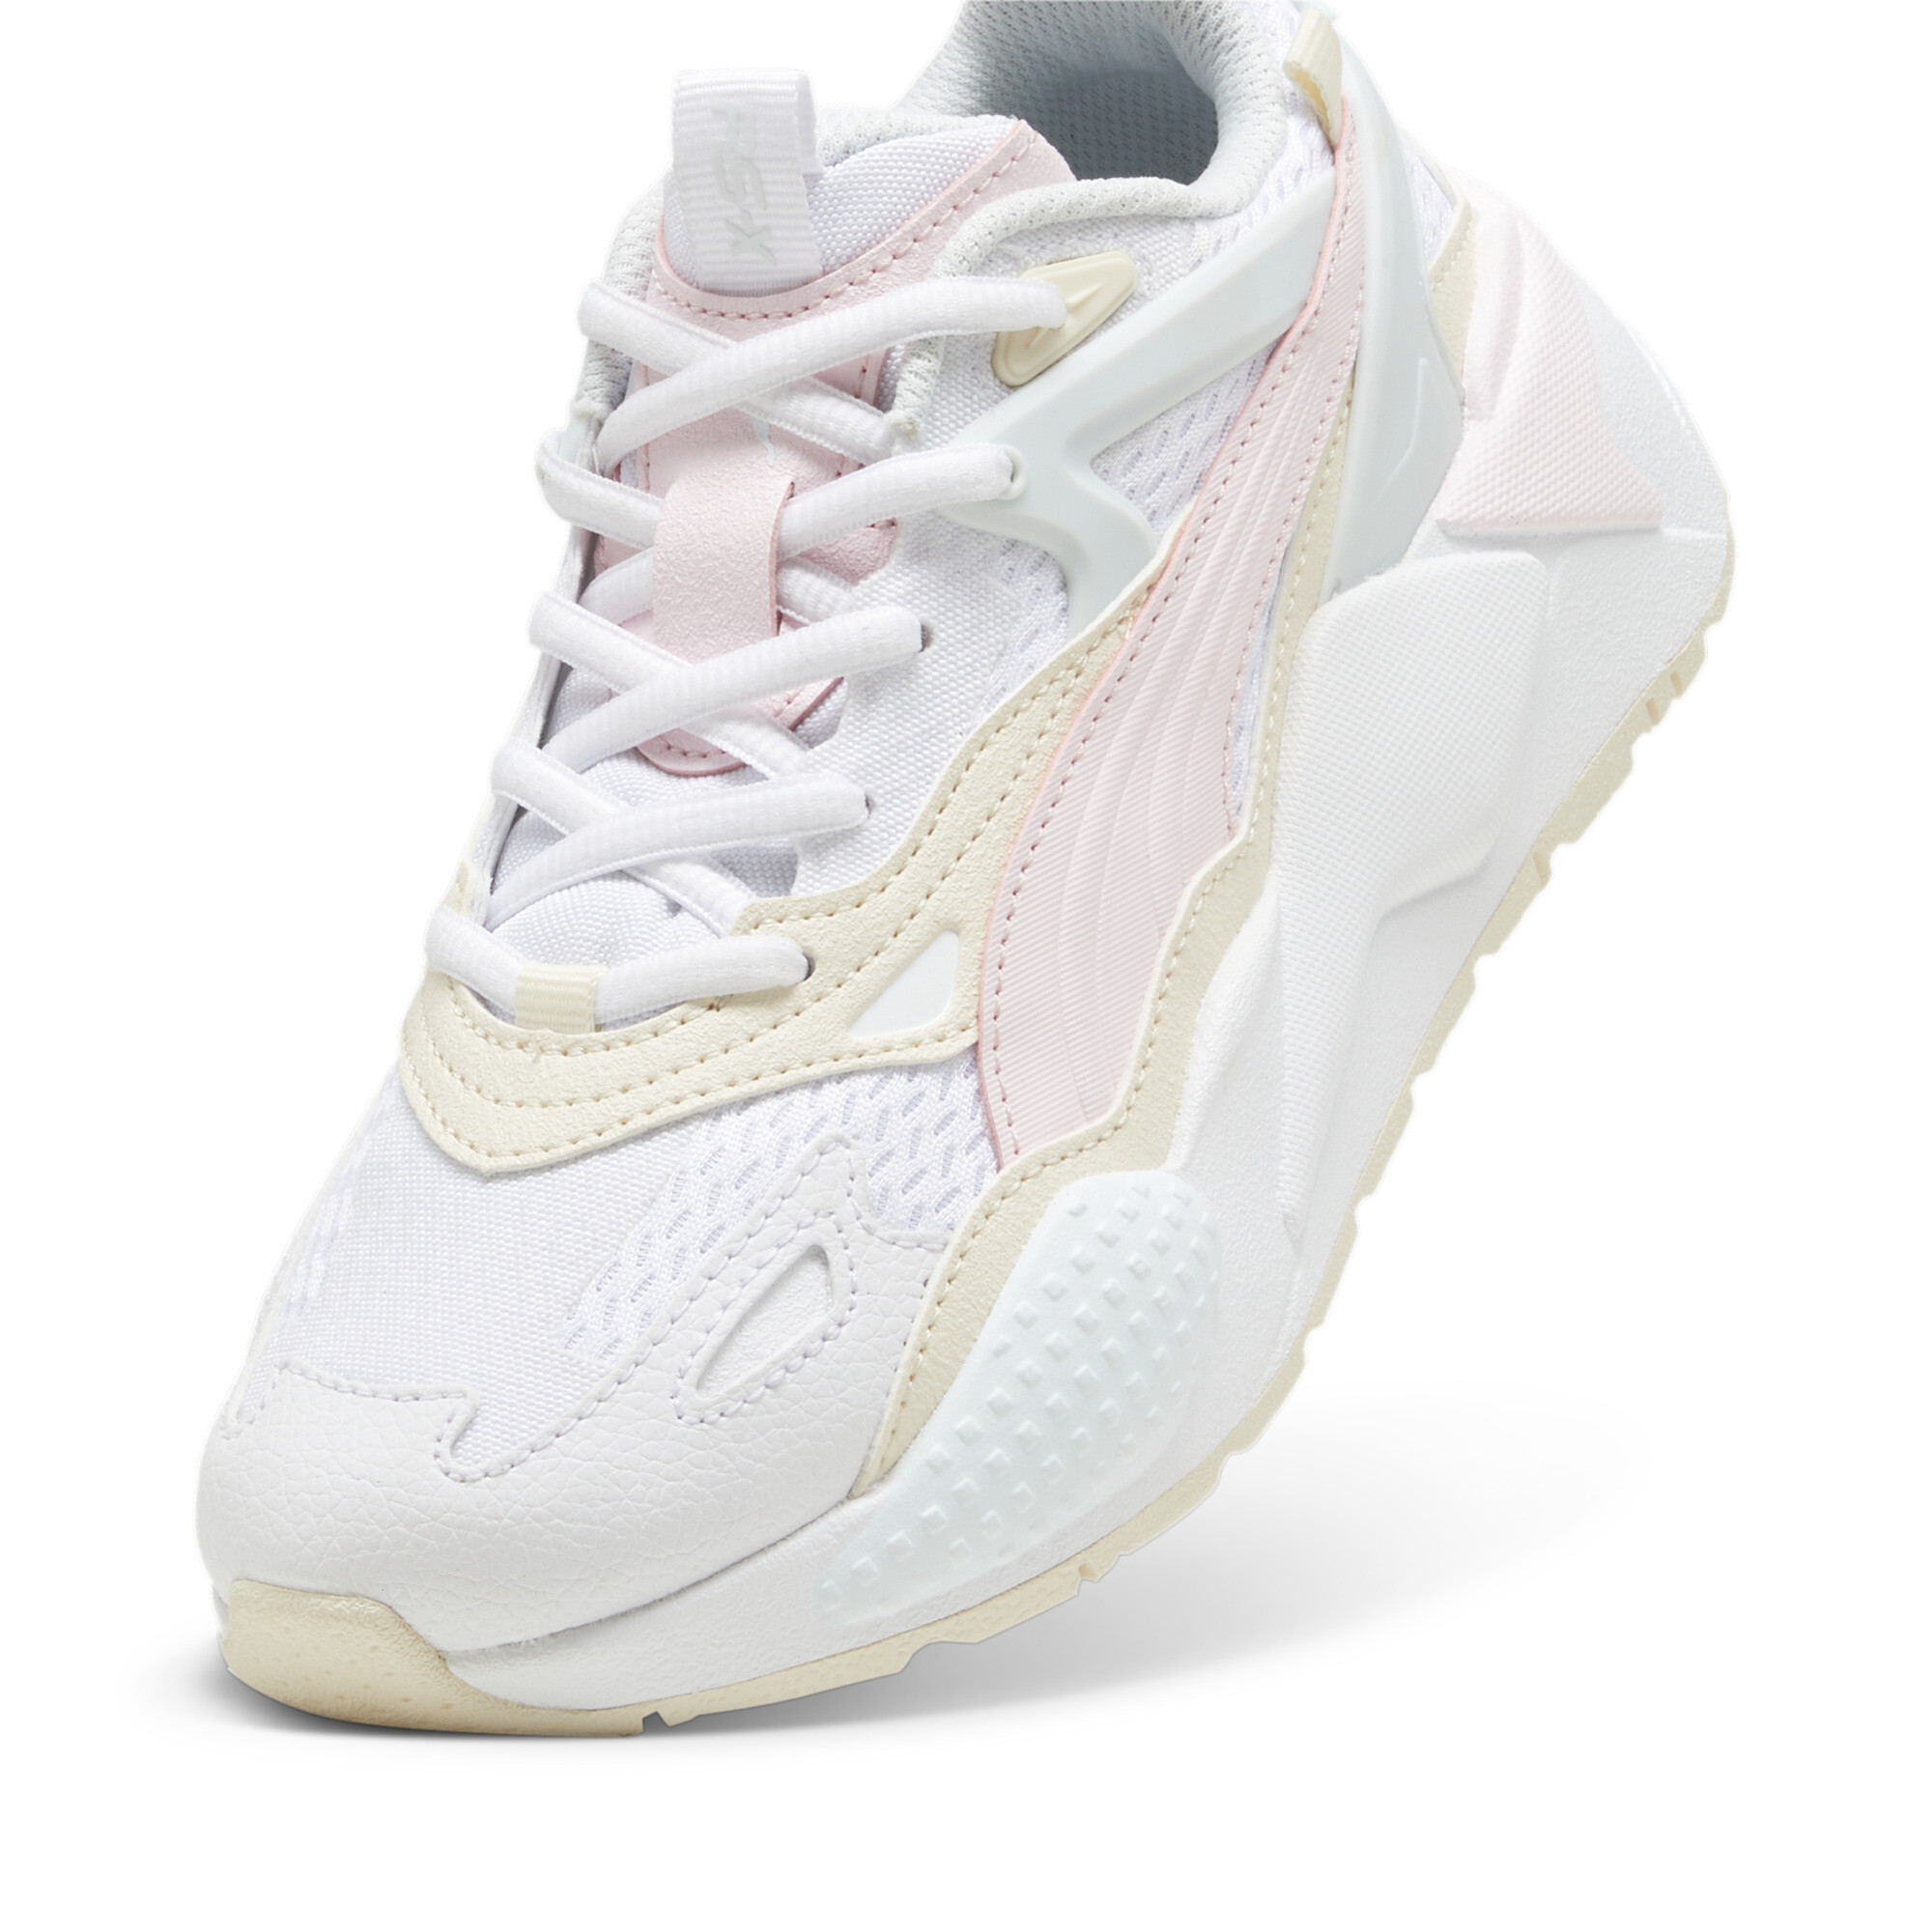 Puma RS-X Efekt Youth Sneakers, White, Size 38, Shoes